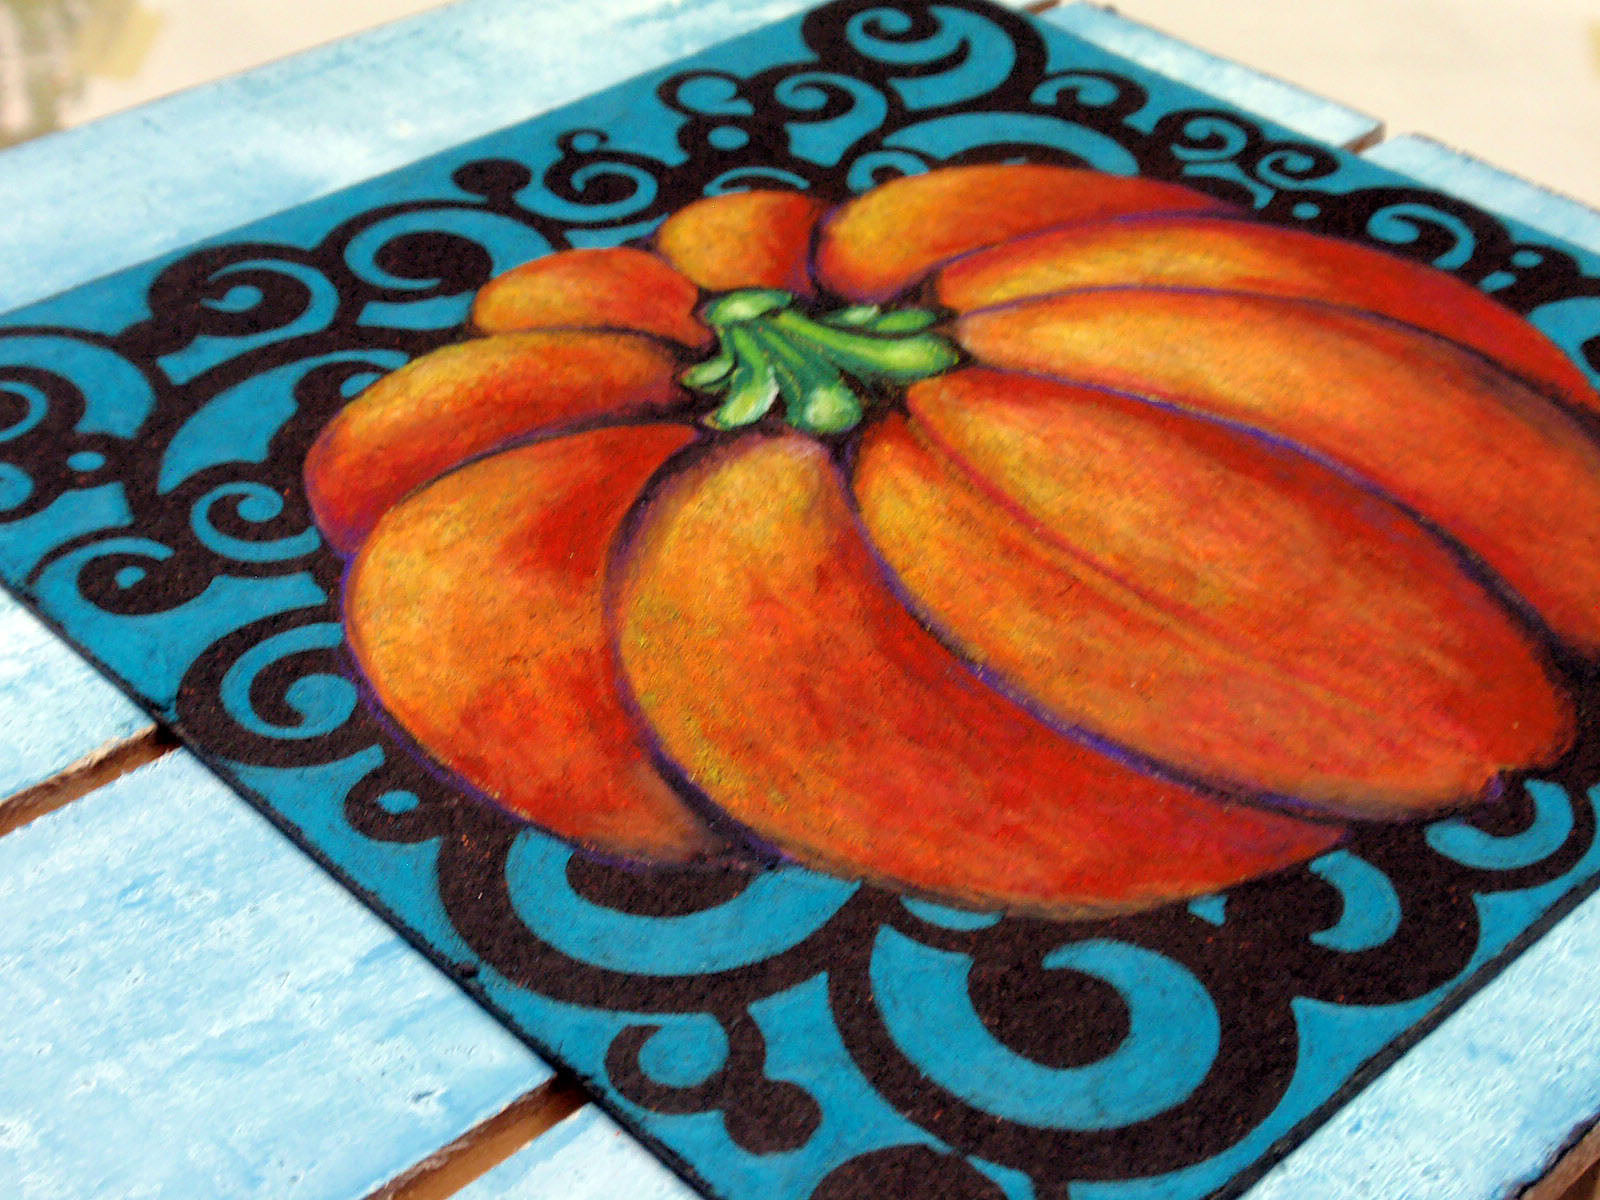 How to Layer Colored Pencils for DIY Fall Pumpkin Art